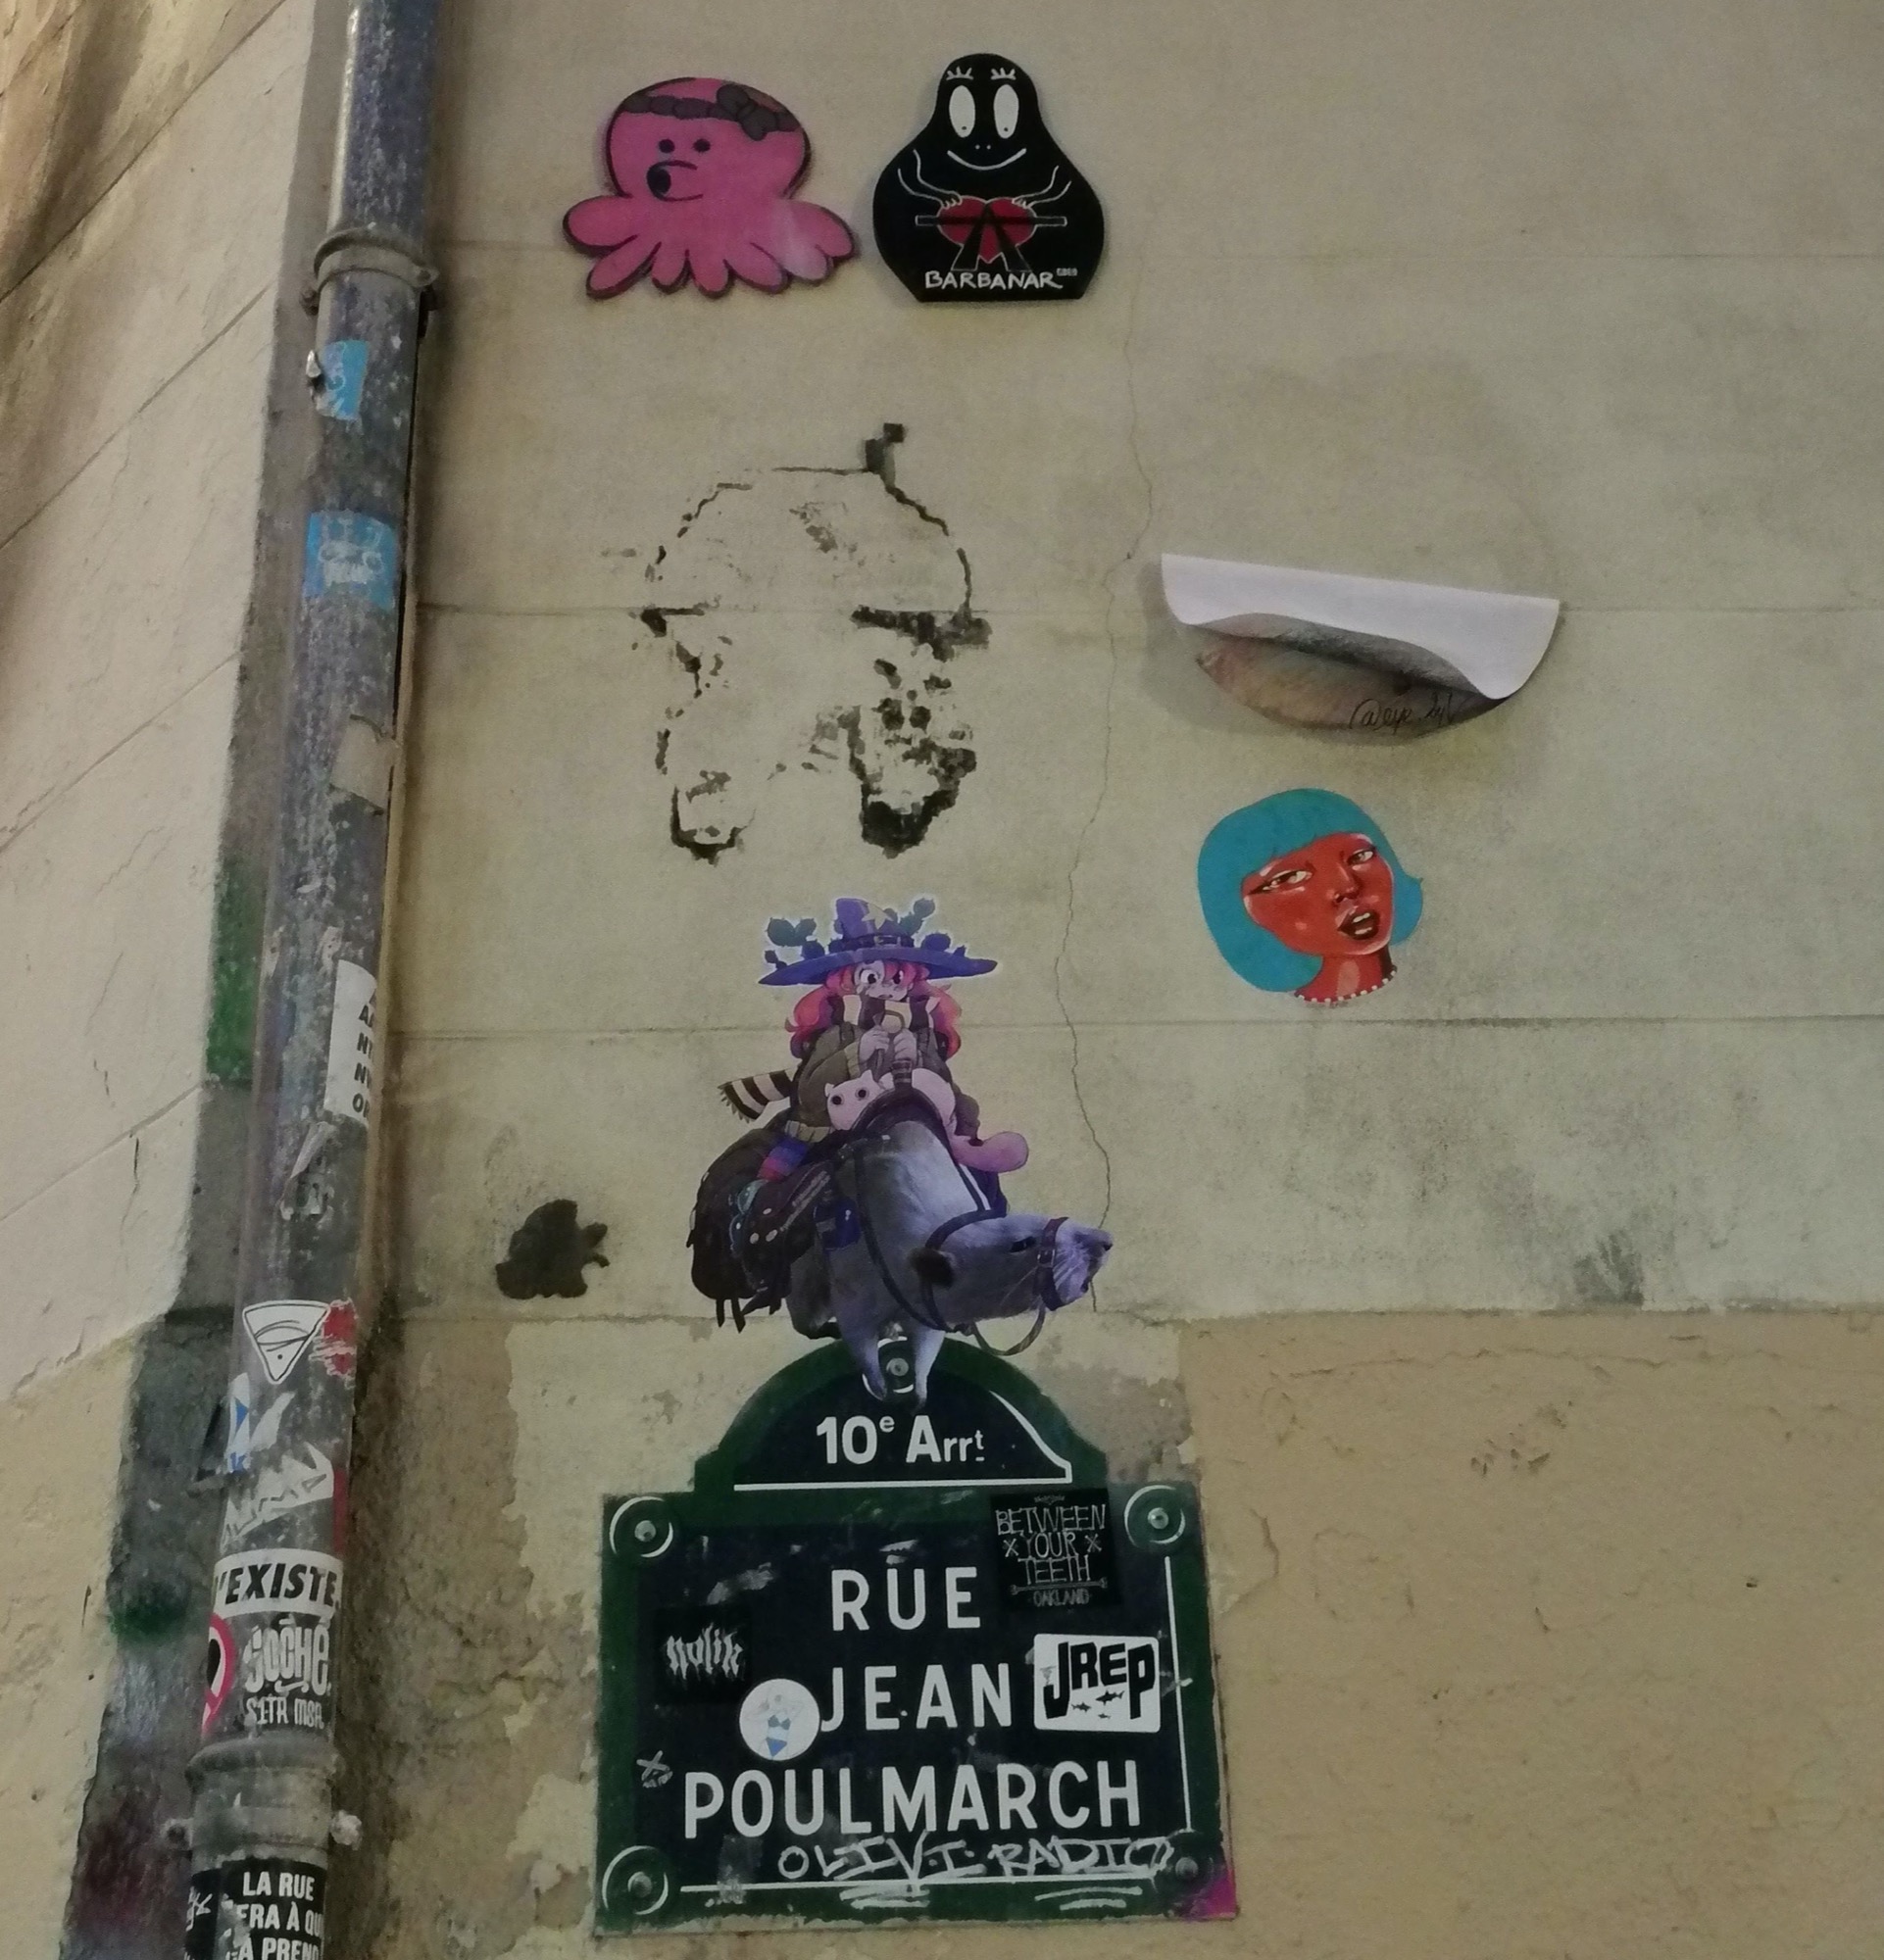 Sticking 660  by the artist Gzup captured by Rabot in Paris France